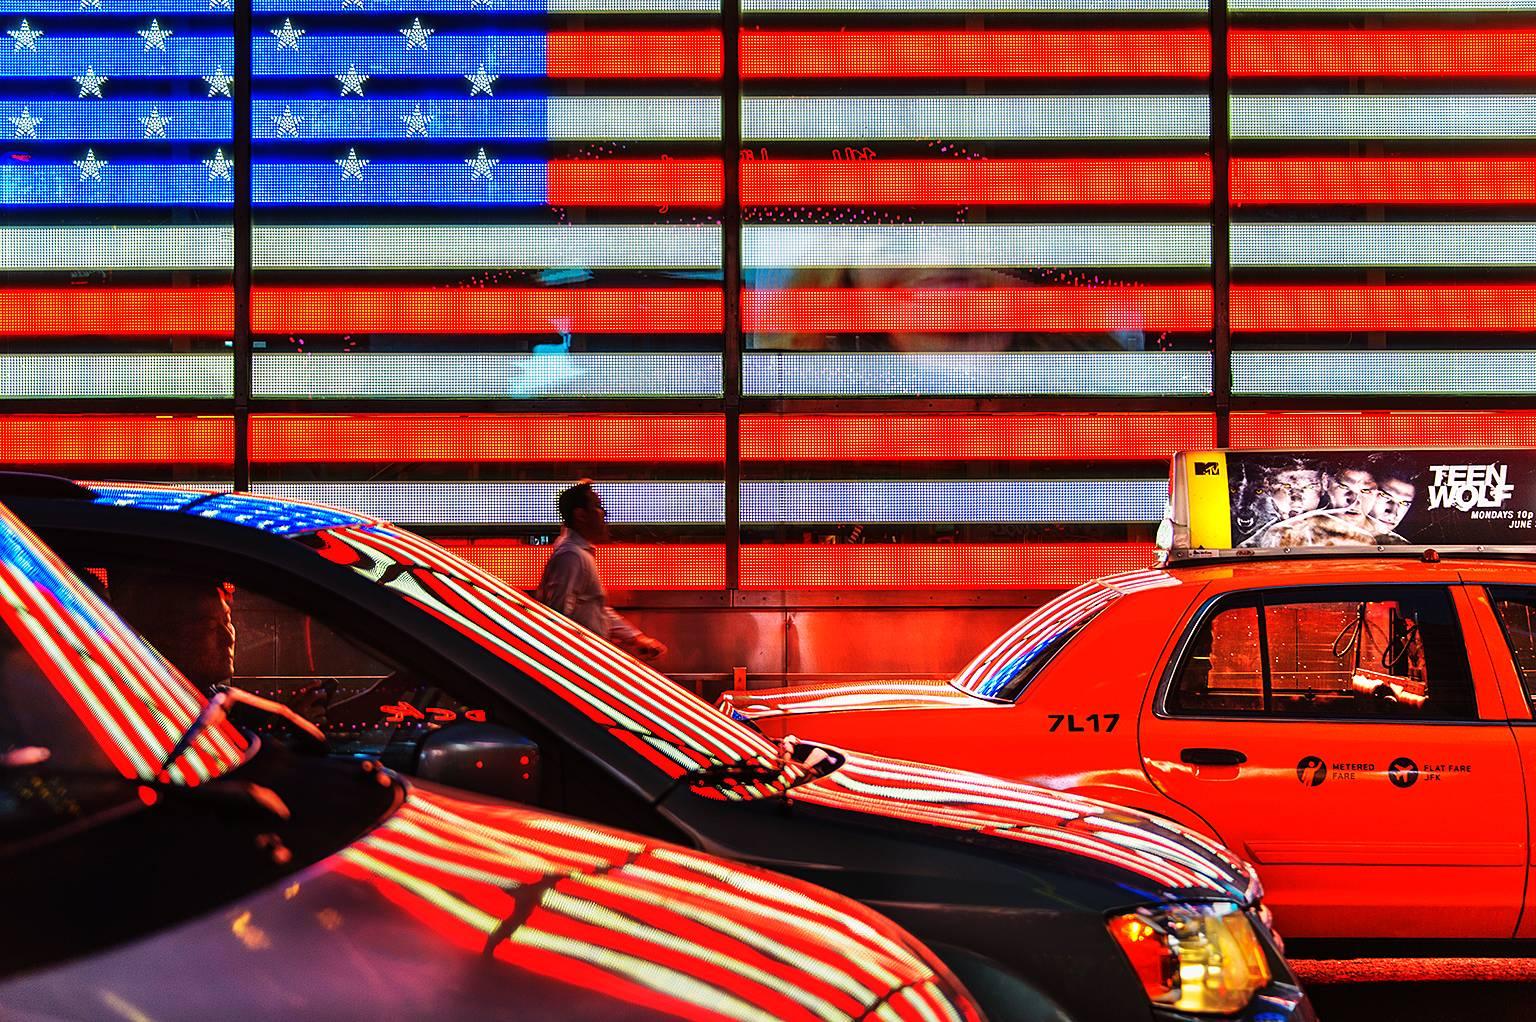 Mitchell Funk Color Photograph - American Flag in Neon in New York City Street Scene at Night